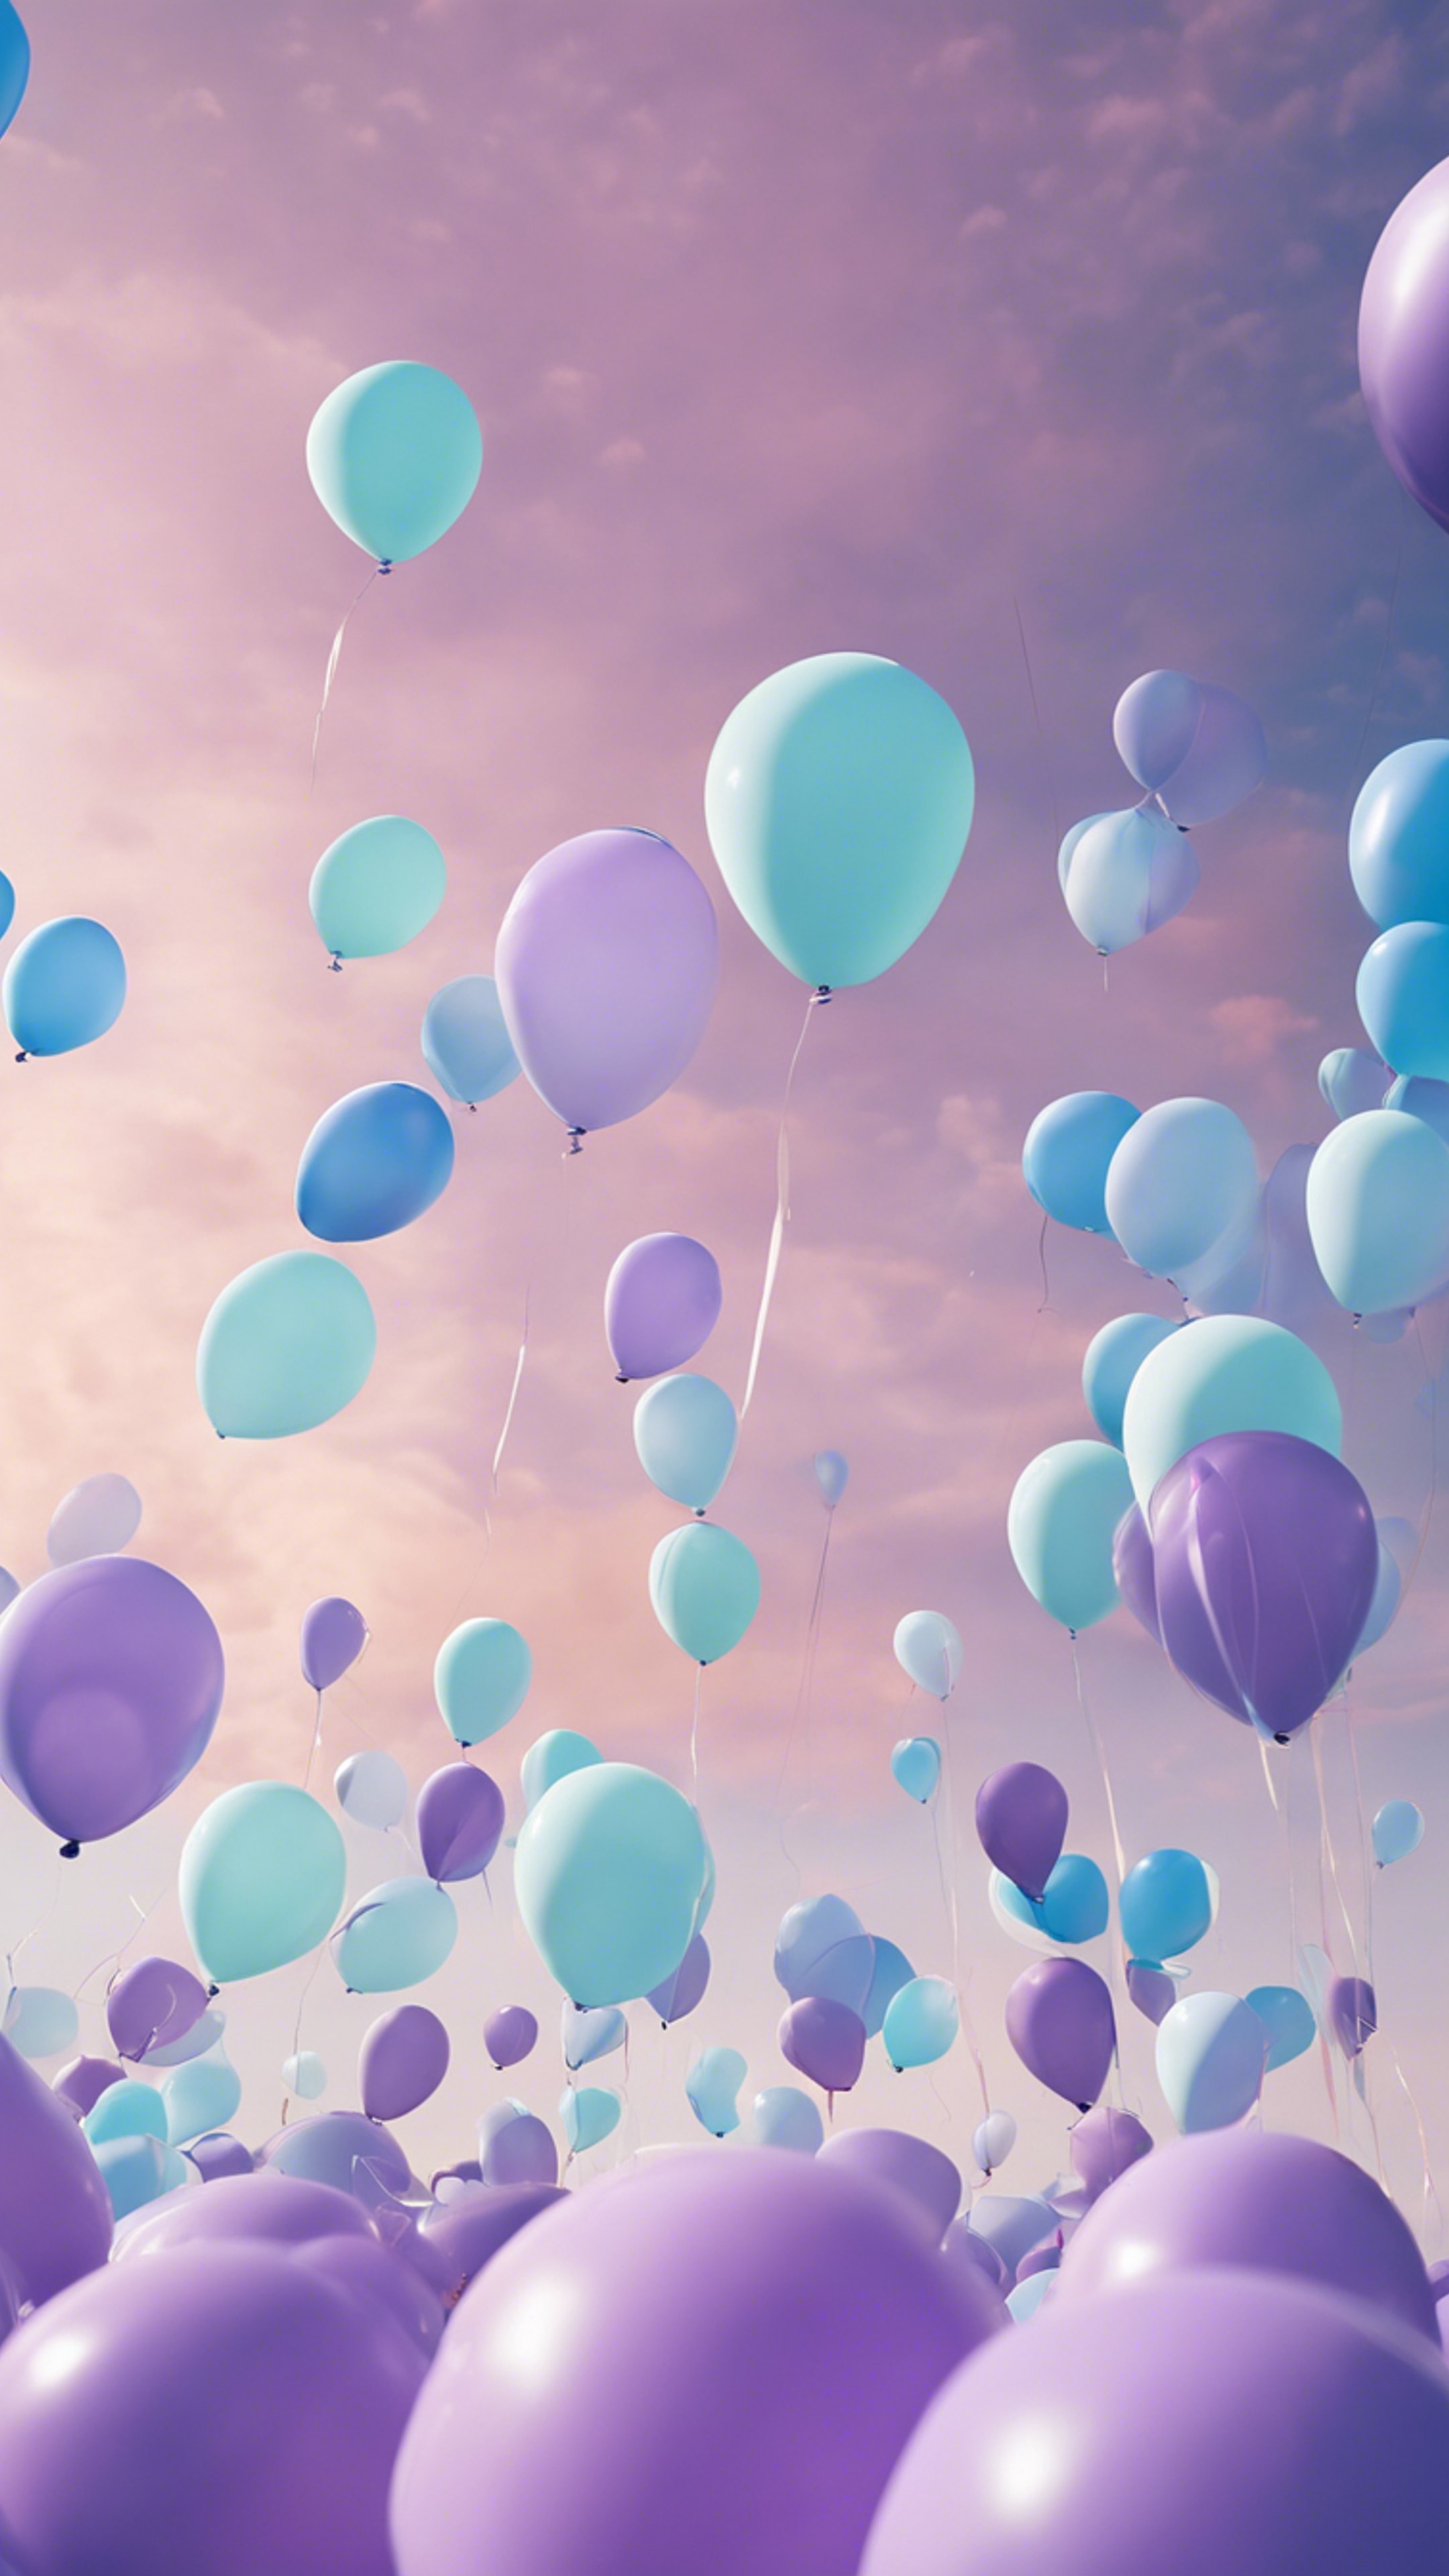 A whimsical scene of pastel purple and blue balloons filling the summer sky. Kertas dinding[fd1f8f768f0047c48fb6]